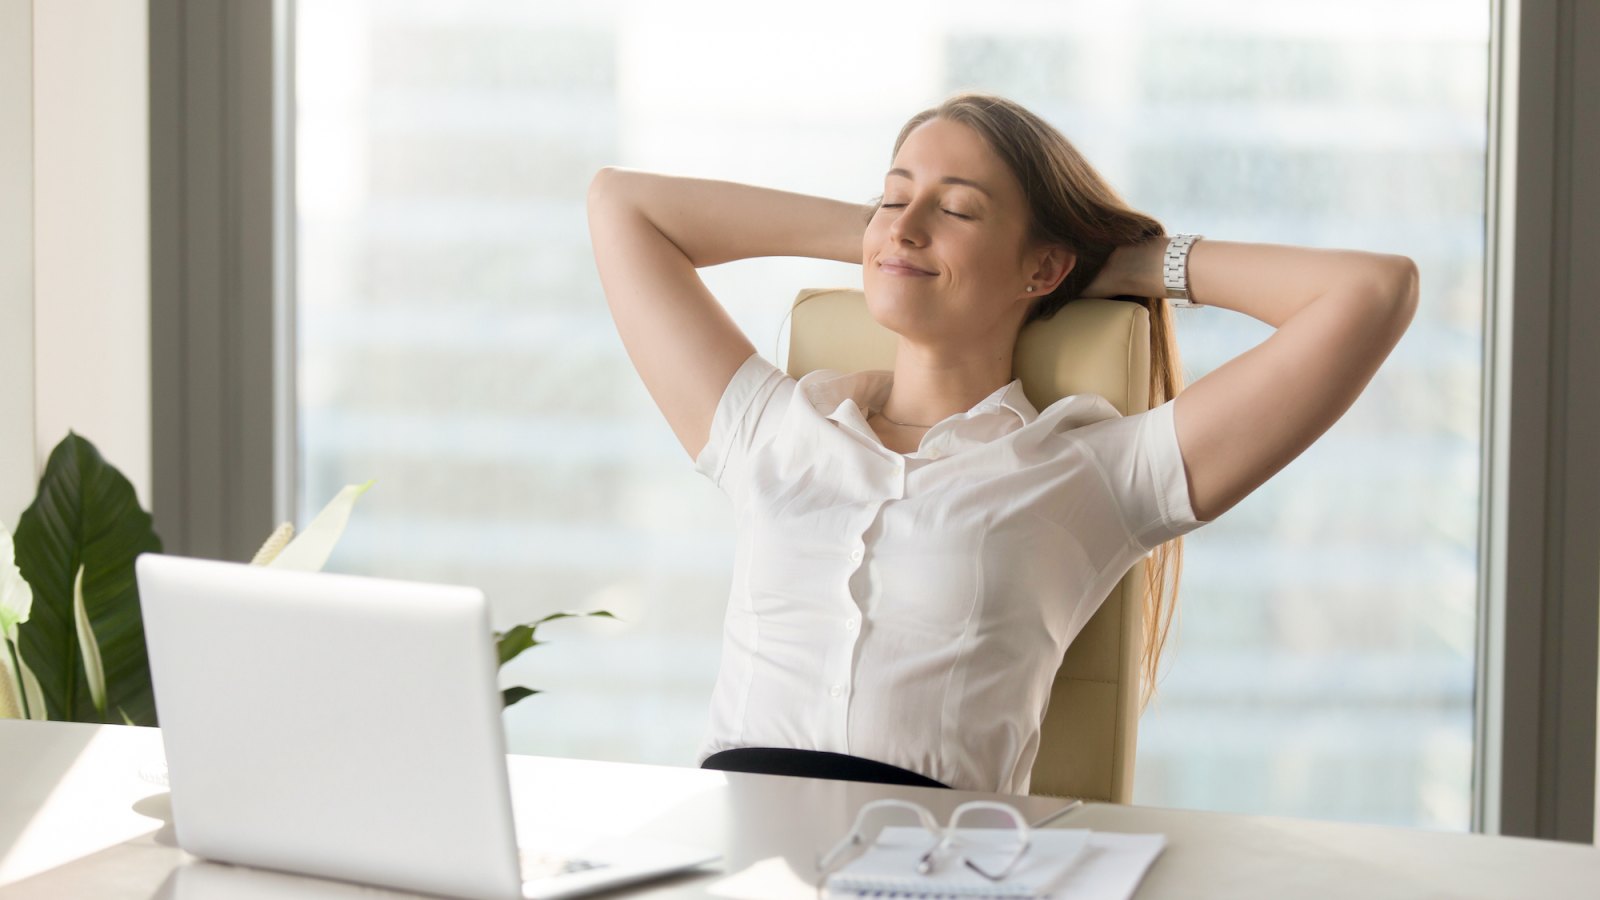 Woman-Without-Stress-At-Work-Desk-Stock-Photo